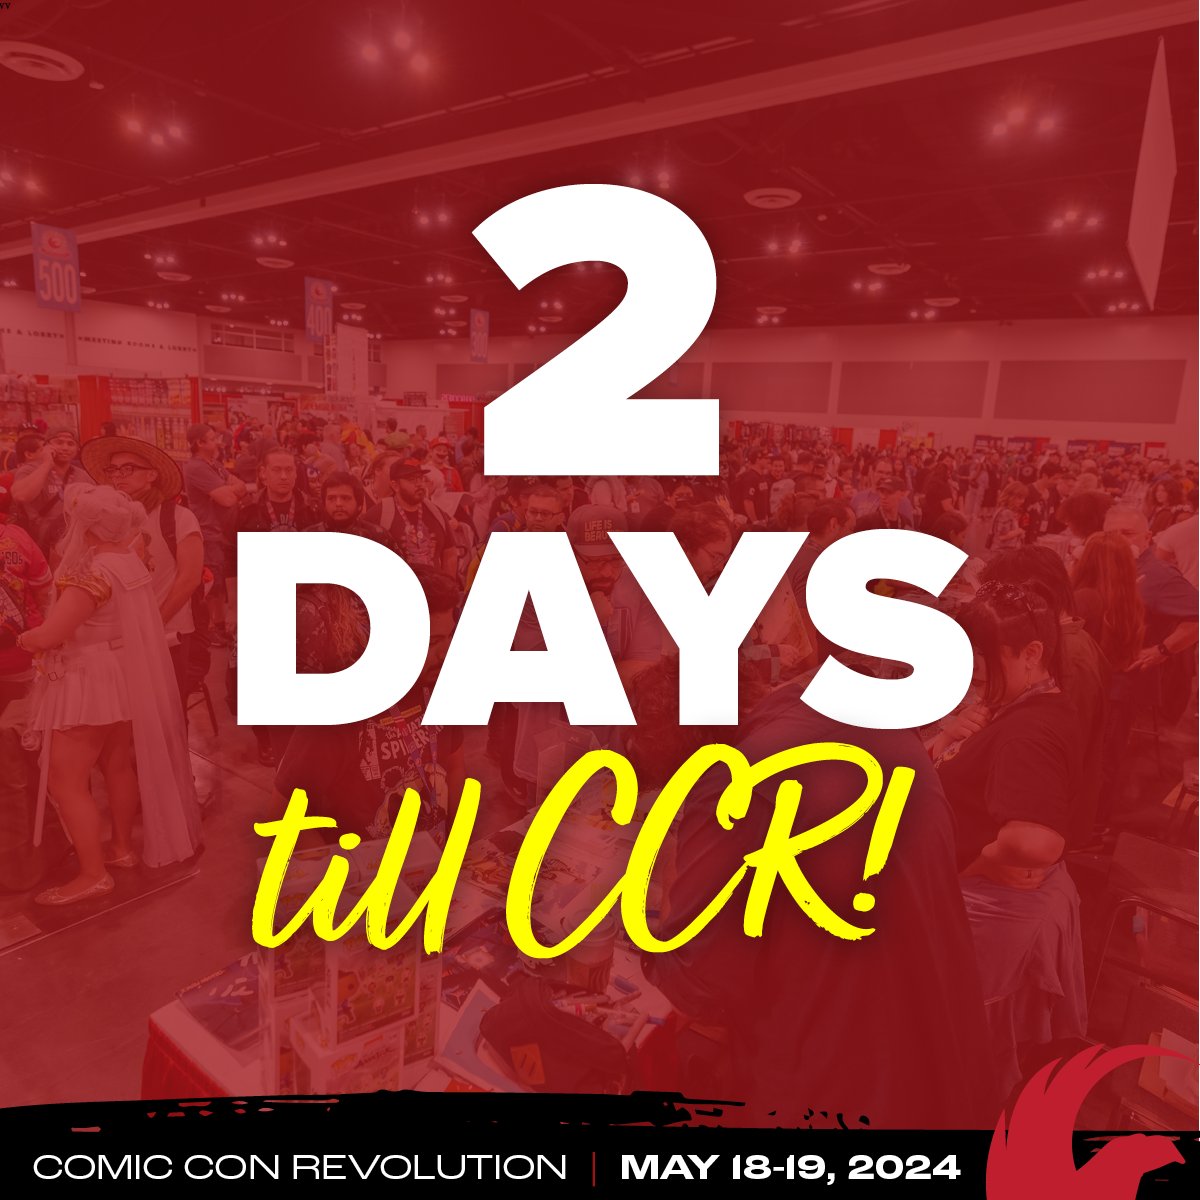 2️⃣ 2 more days til #ComicConRevolution is back at the Ontario Convention Center this weekend, 5/18 & 19, 2024! Don't miss guests, comic book stars, cosplay, entertaining programming + more. Tickets: CCRTix.com #comiccon #inlandempire #ontariocalifornia #socal